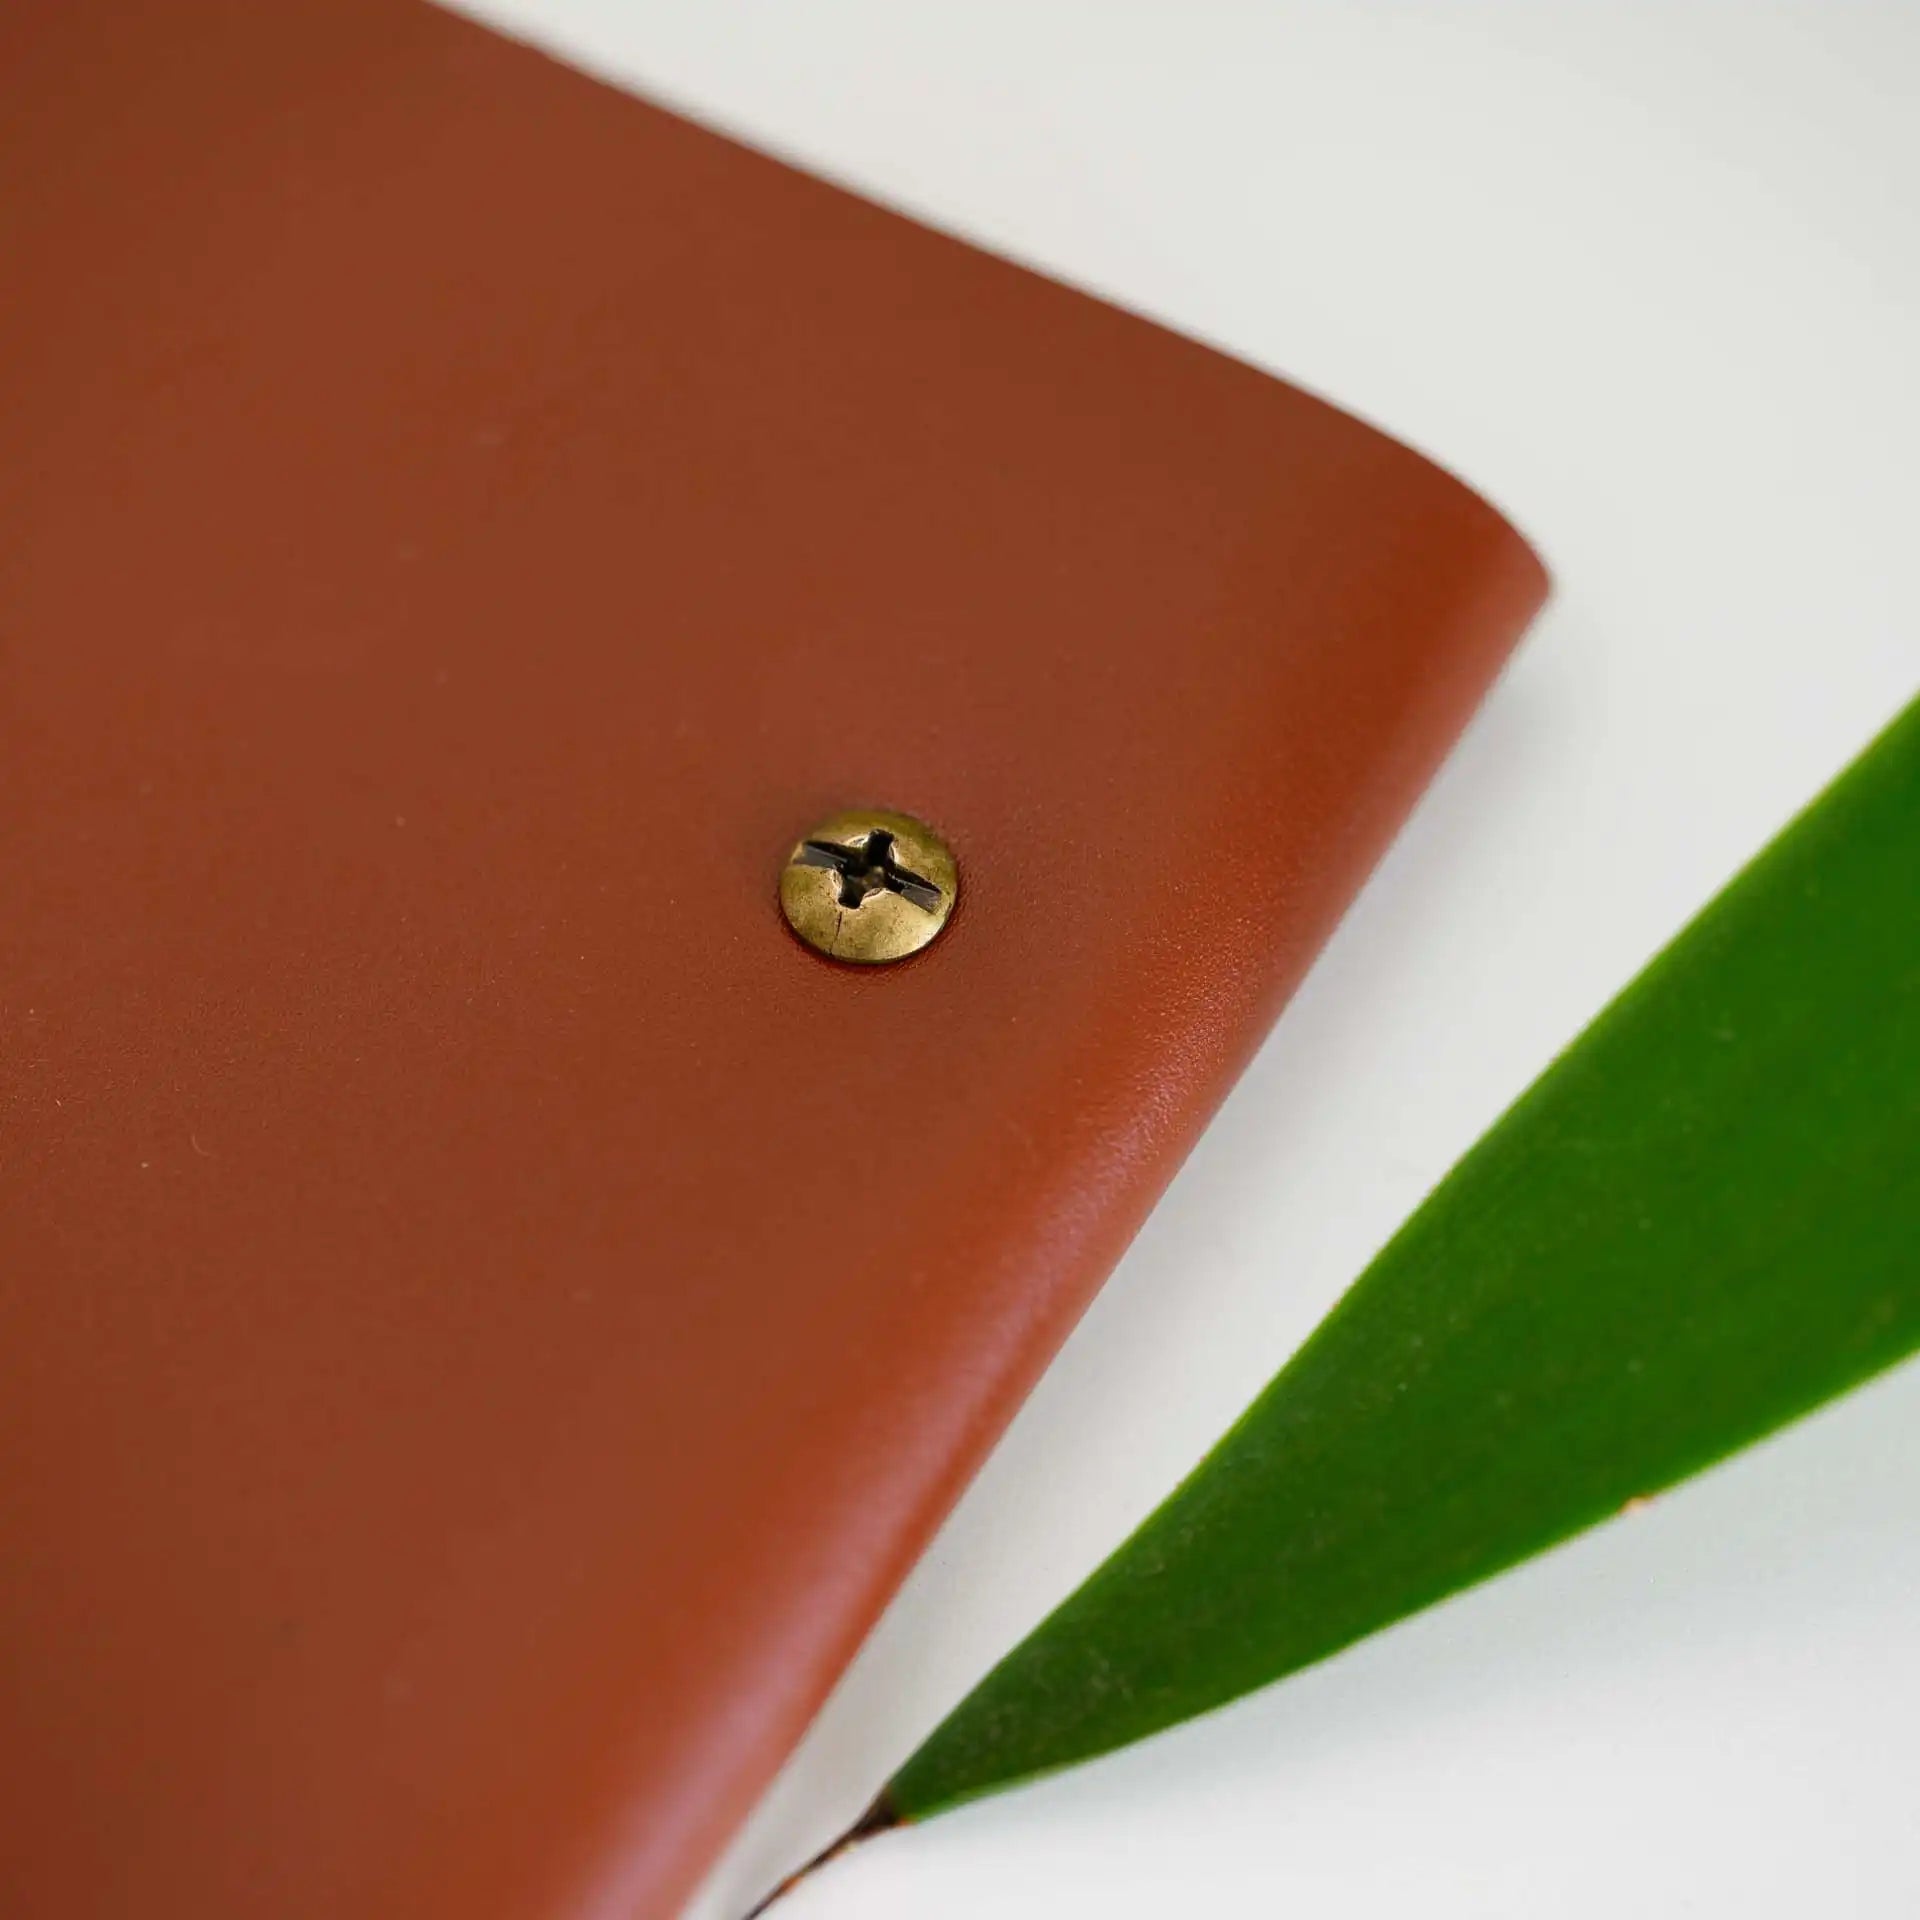 Chic Leather Menu Cover, adding a touch of luxury to your dining establishment.